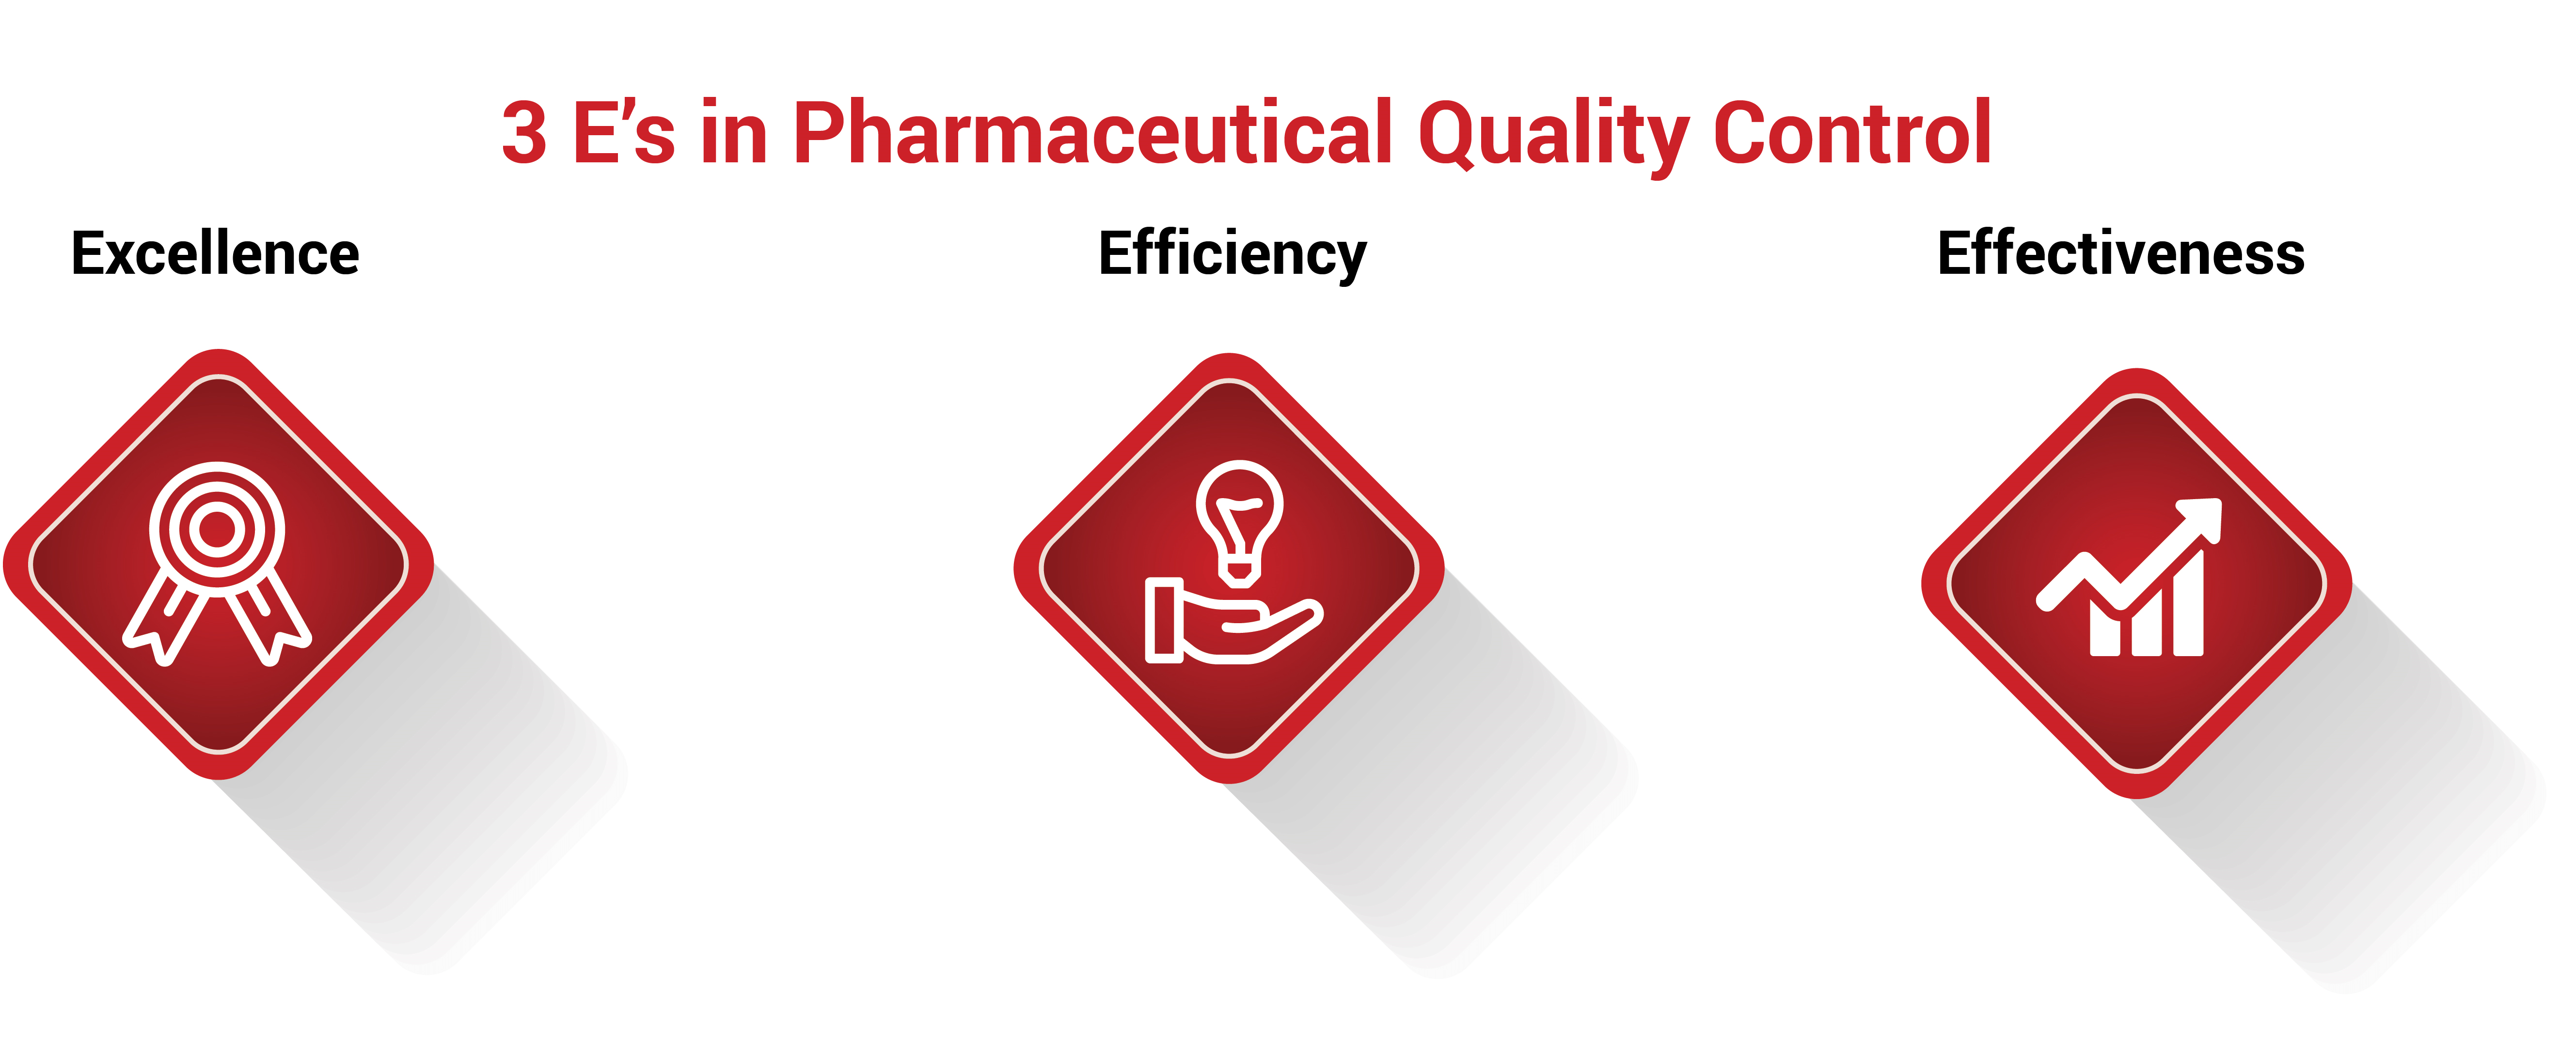 Three E Logo - the-three-e's-in-pharmaceutical-industry-quality-control - PECB Insights